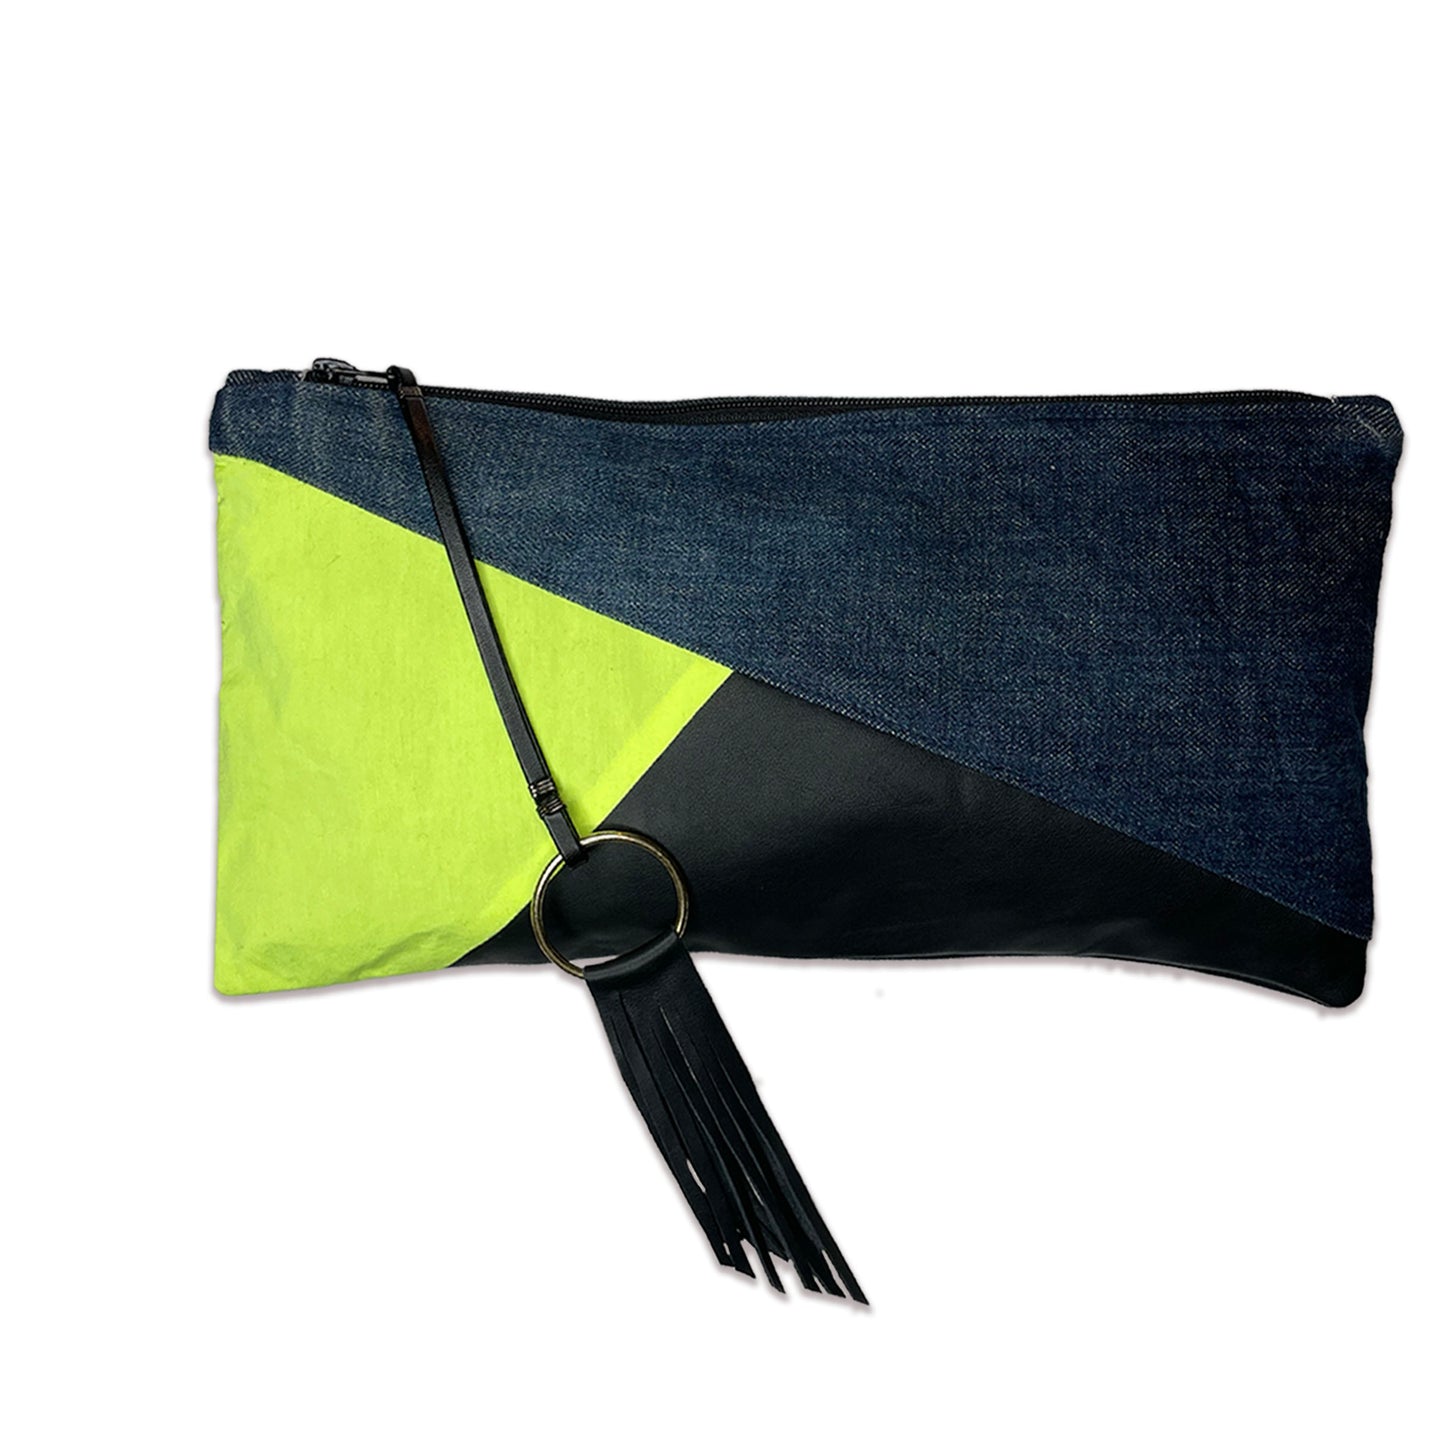 Neon Prism Clutch Bag, Upcycled Denim + Leather, Handmade